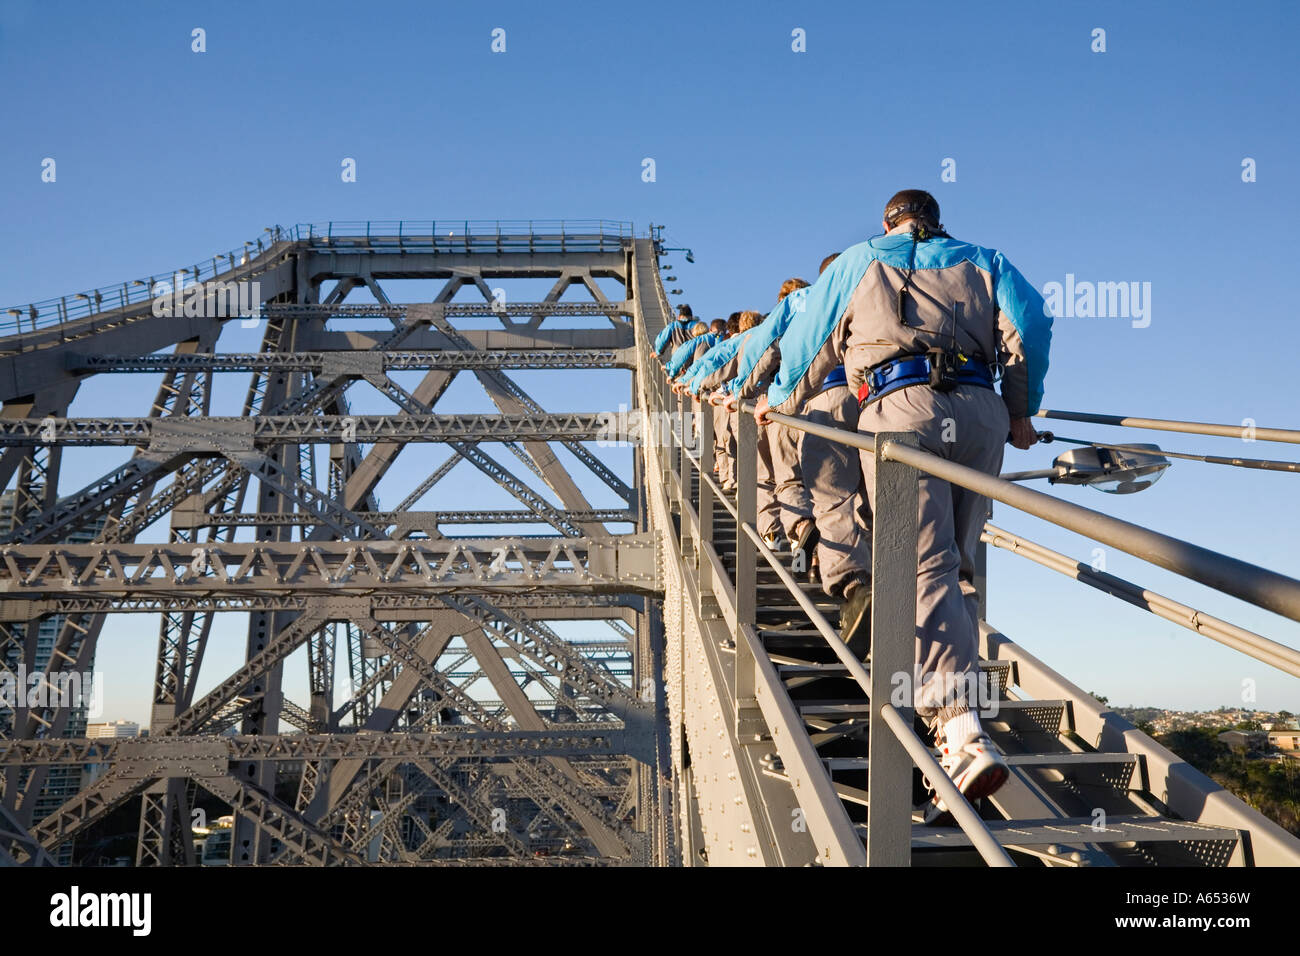 A group of climbers make their way up the steel girders of Brisbane's Story Bridge Stock Photo